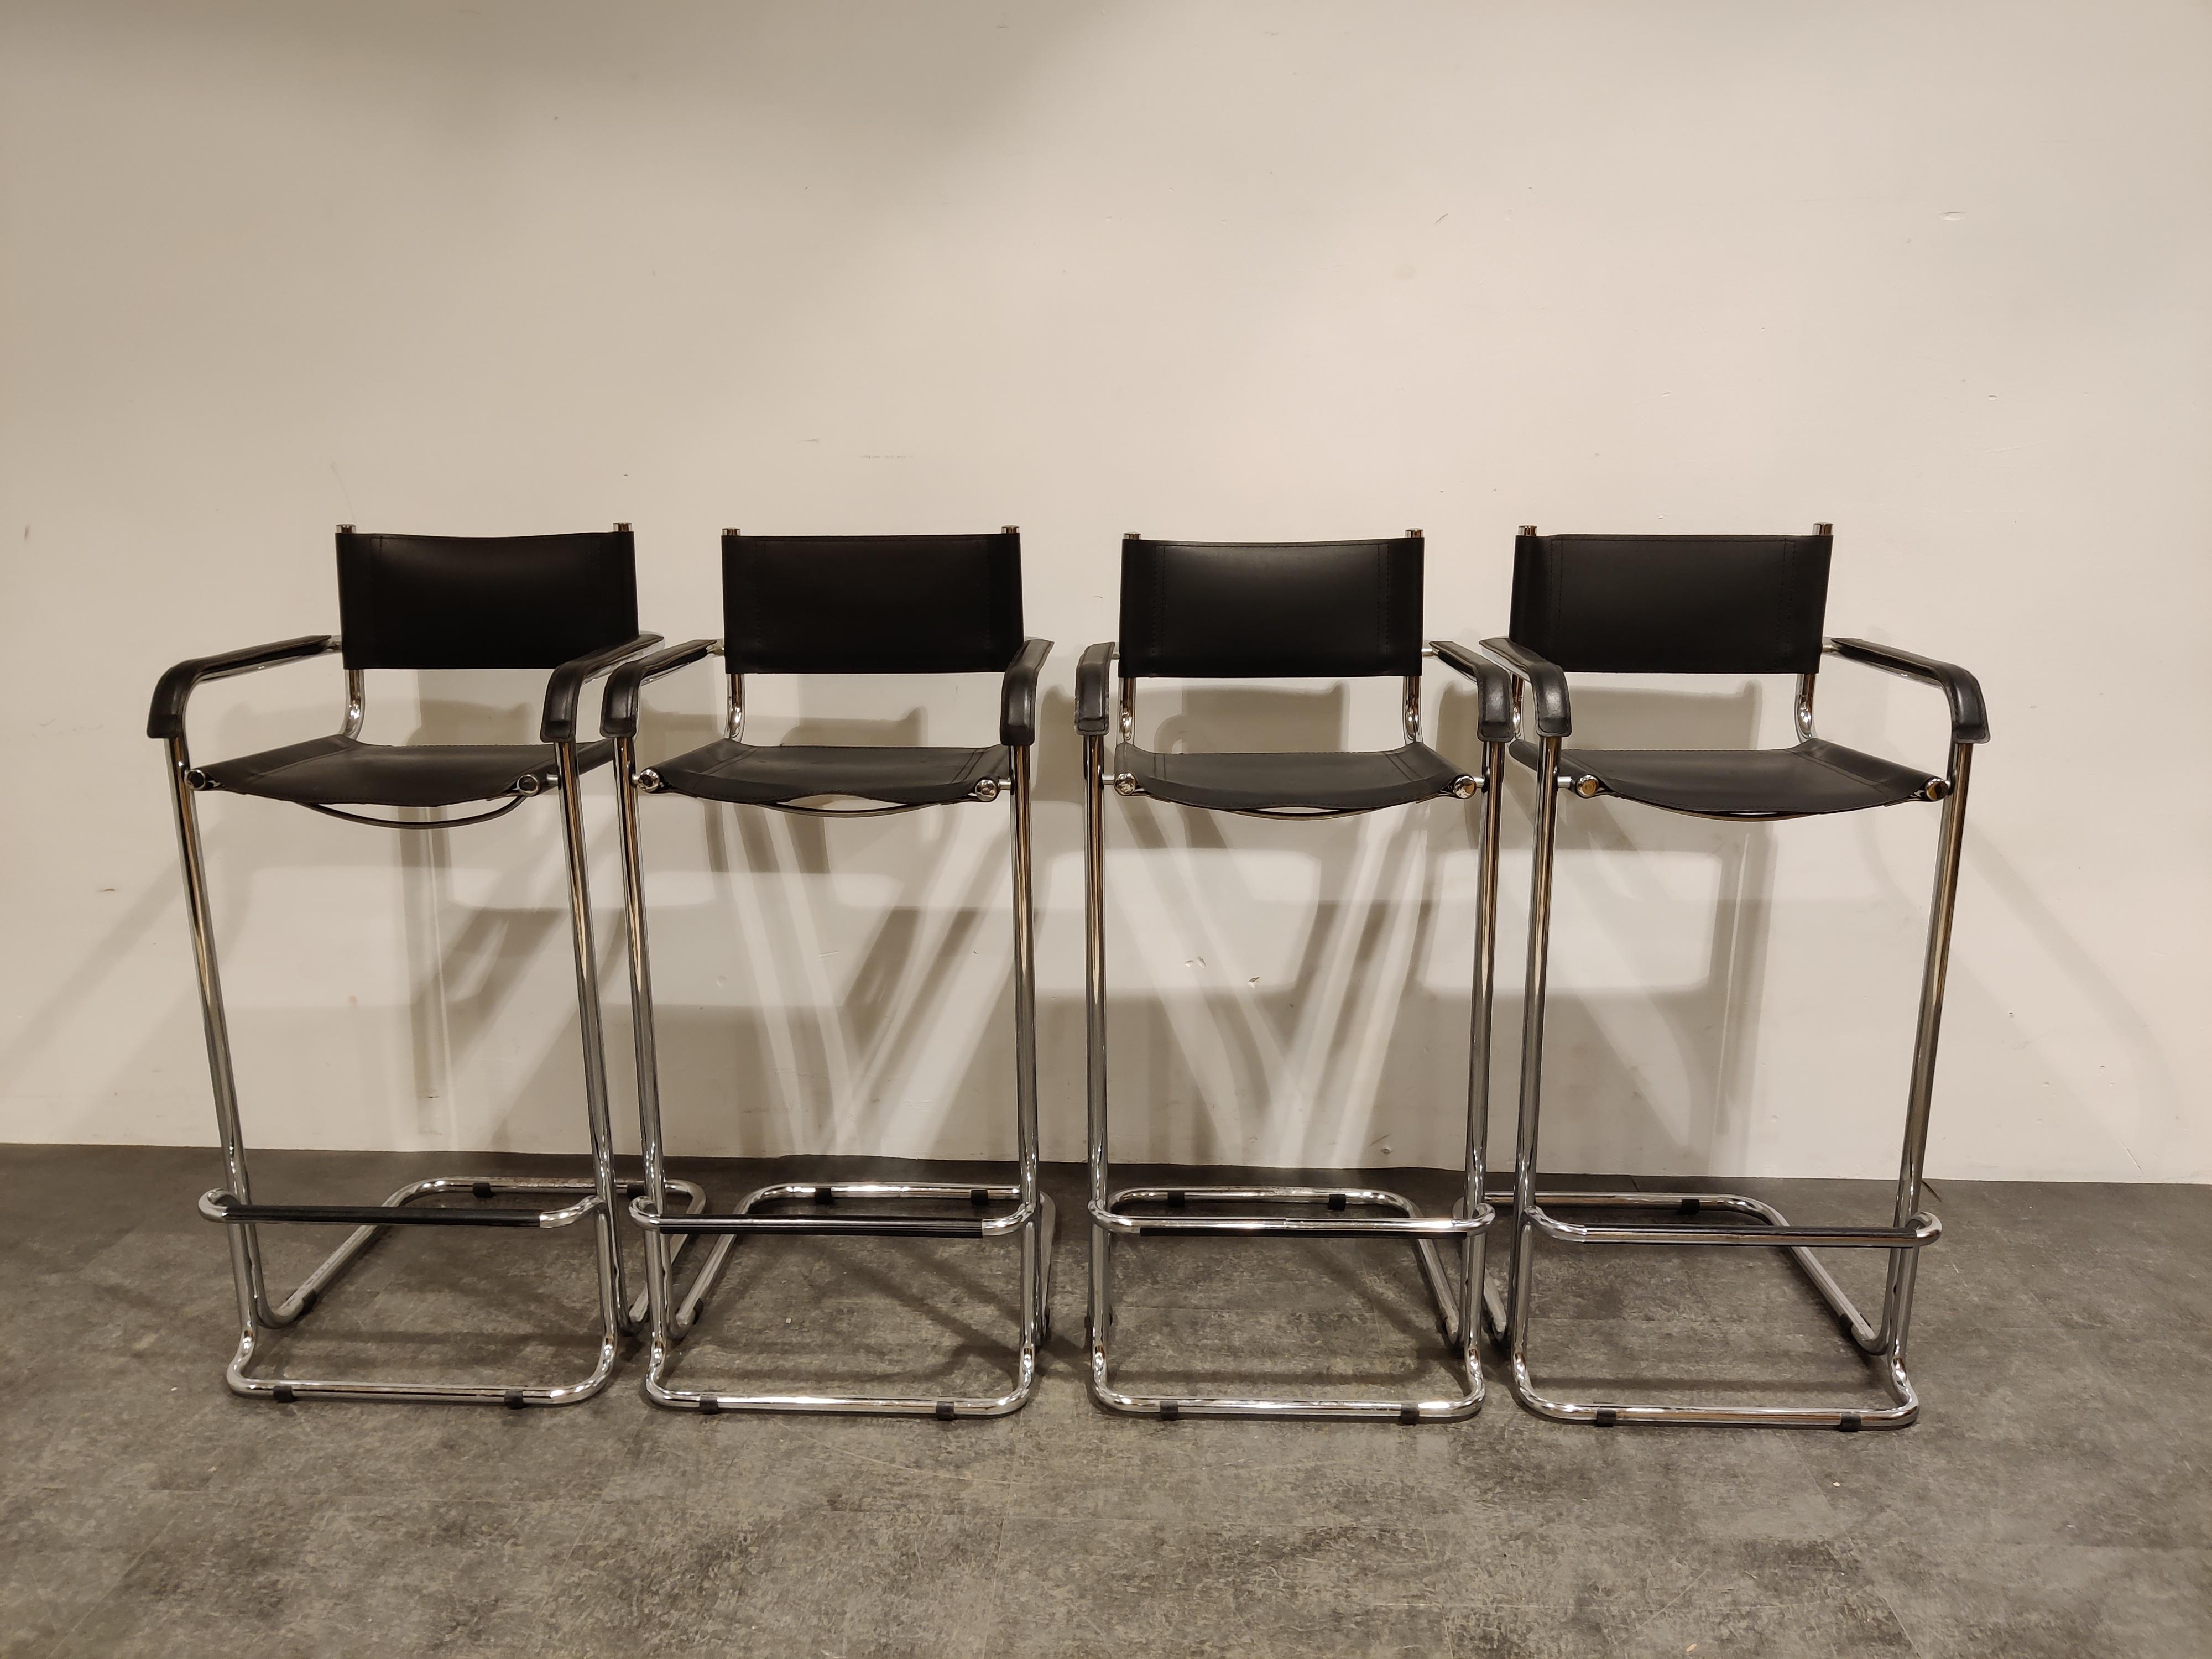 Marcel breuer/Mart Stam inspired Bauhaus design bar stools with a tubular chrome frame and black sling leather seats, armrests and backrests.

Nice cantilevered design, typical for the bauhaus era.

1970s - Italy

The stools are in good